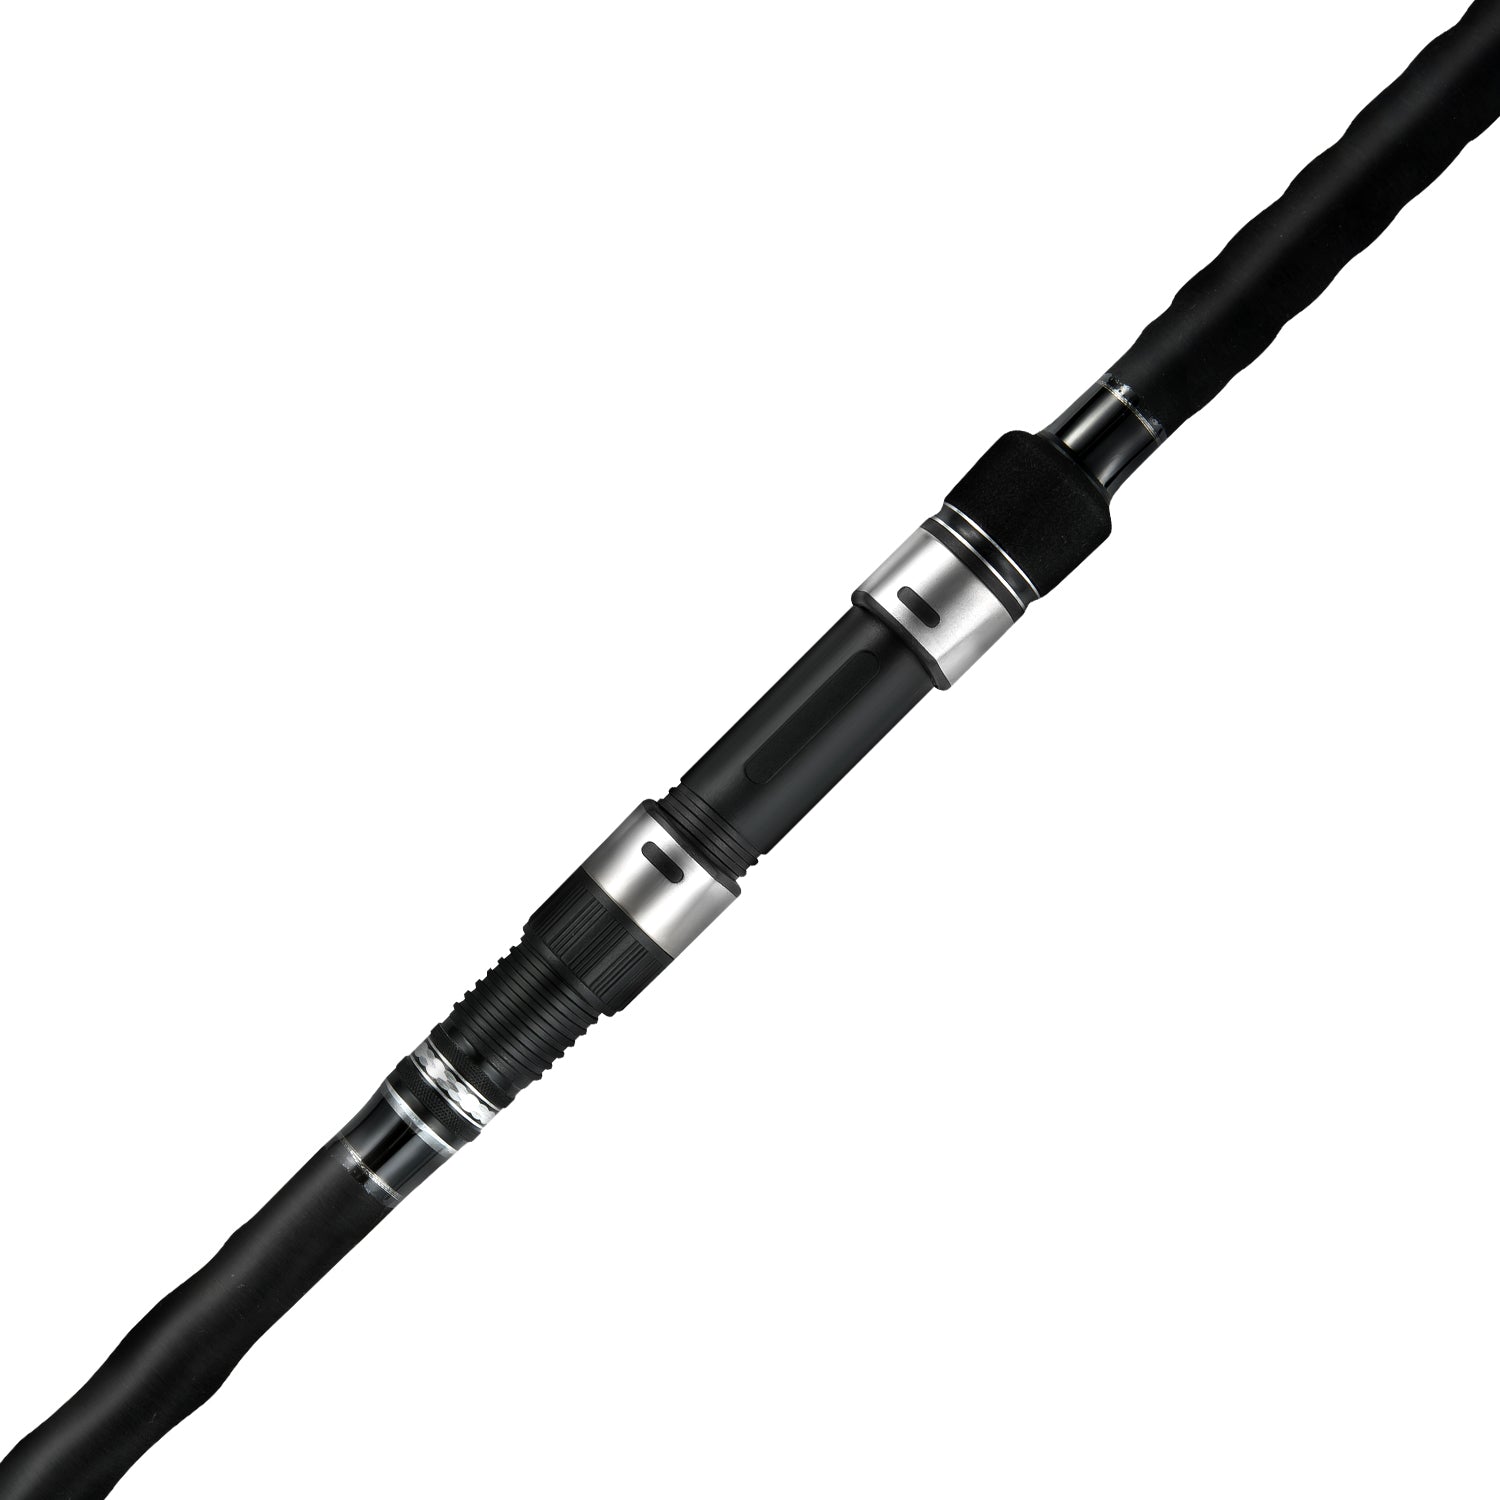 Travel Fishing Rod Fishing Rod Heavy Surf Casting Stainless Steel